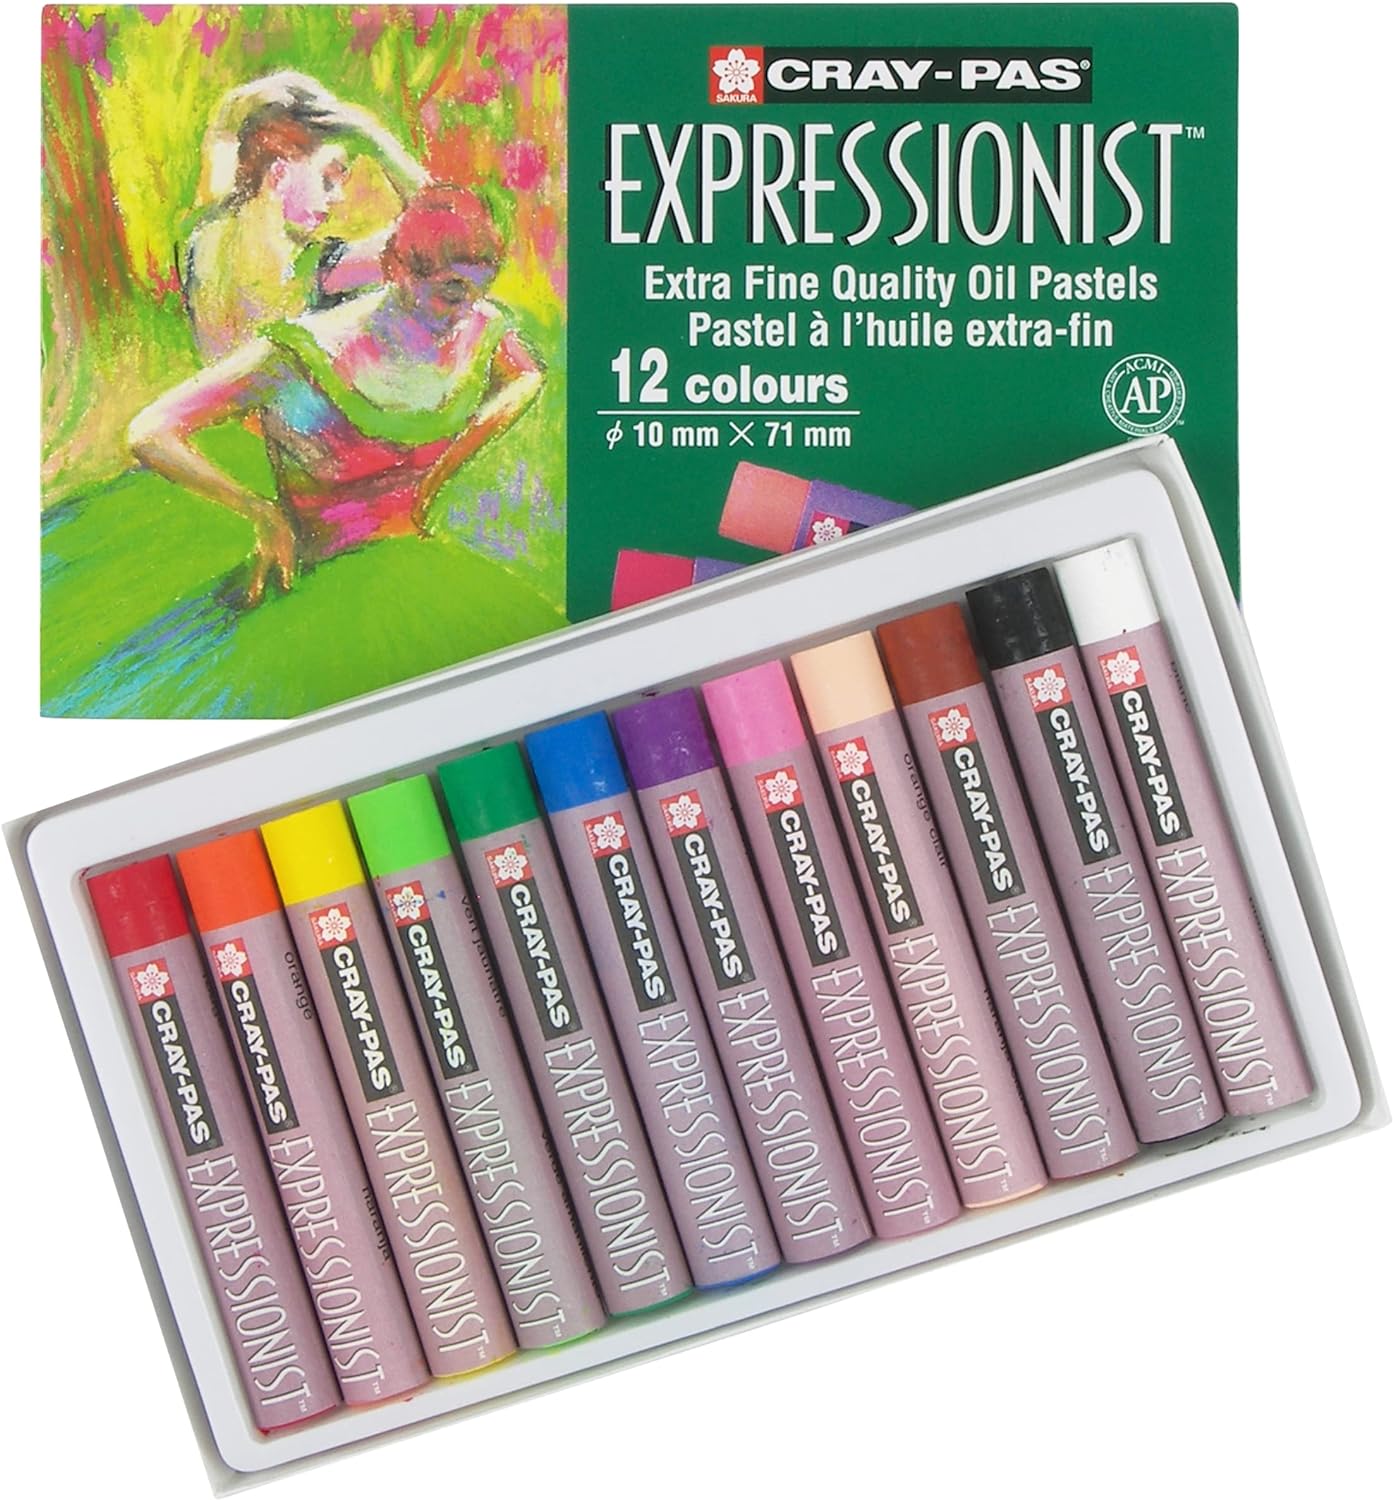 Cray-Pas Expressionist Oil Pastels